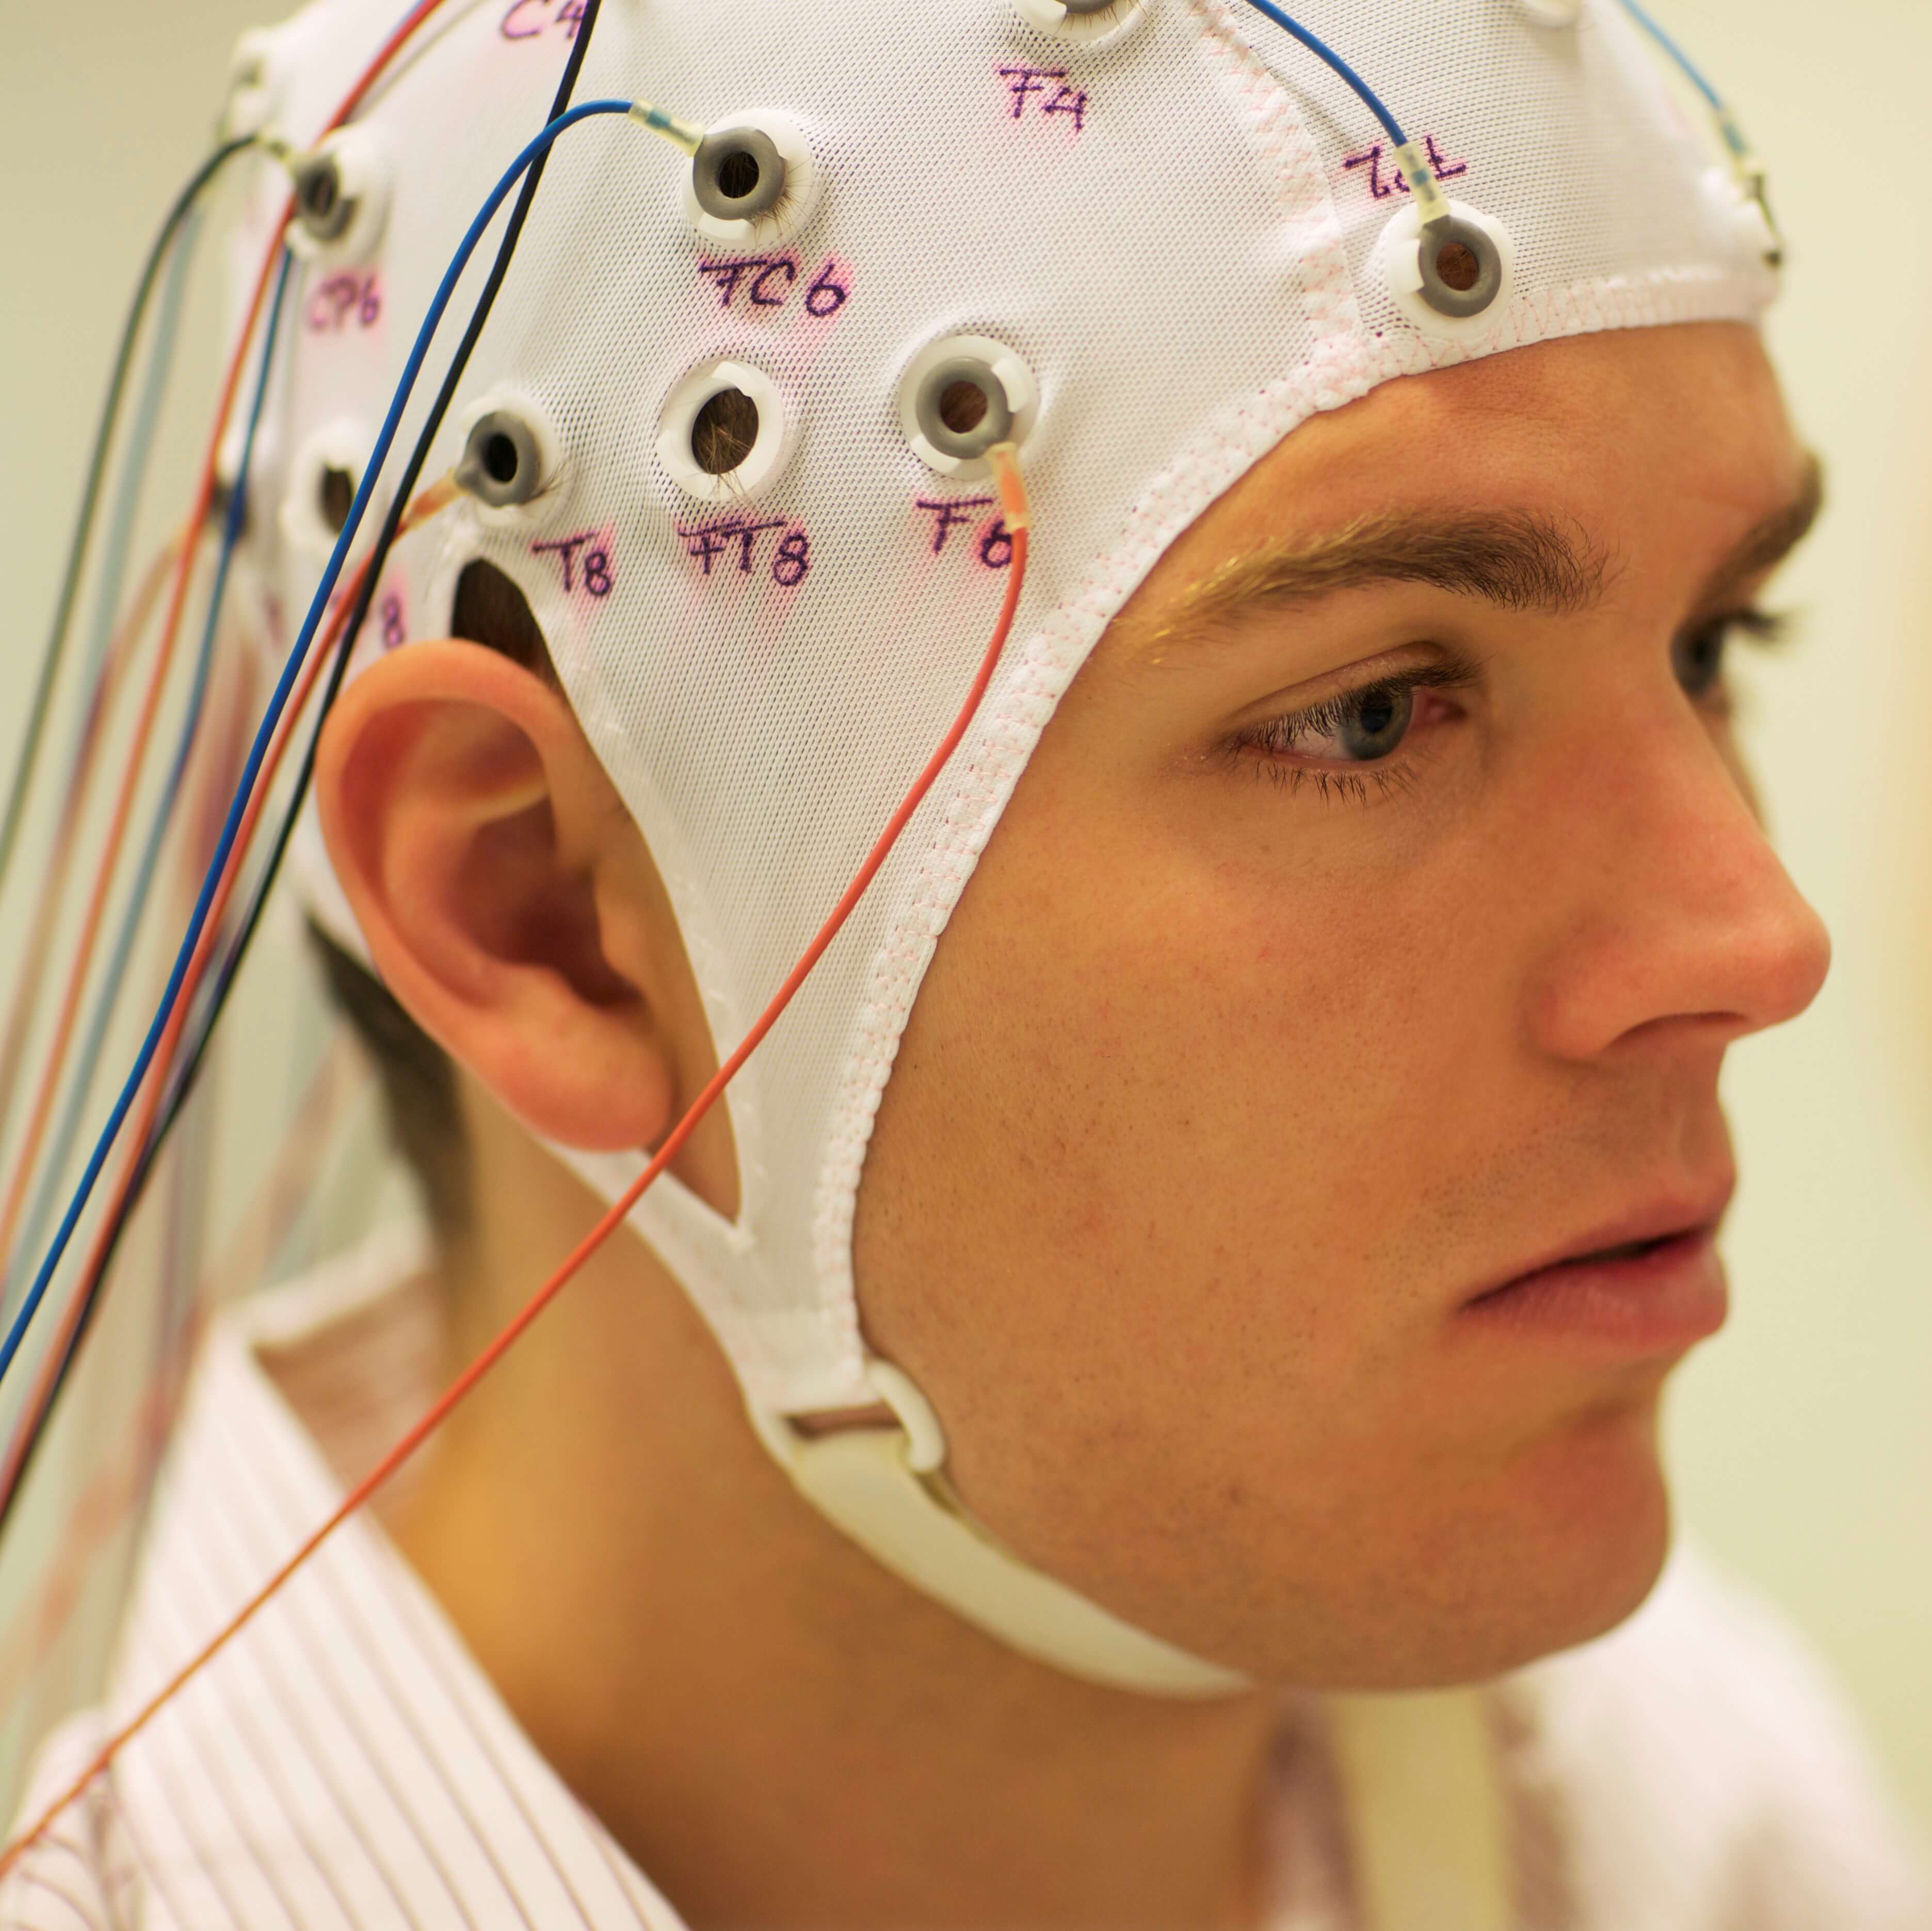 man-connected-with-cables-to-computer---EEG-for-resarch-157433695_5616x3744-1